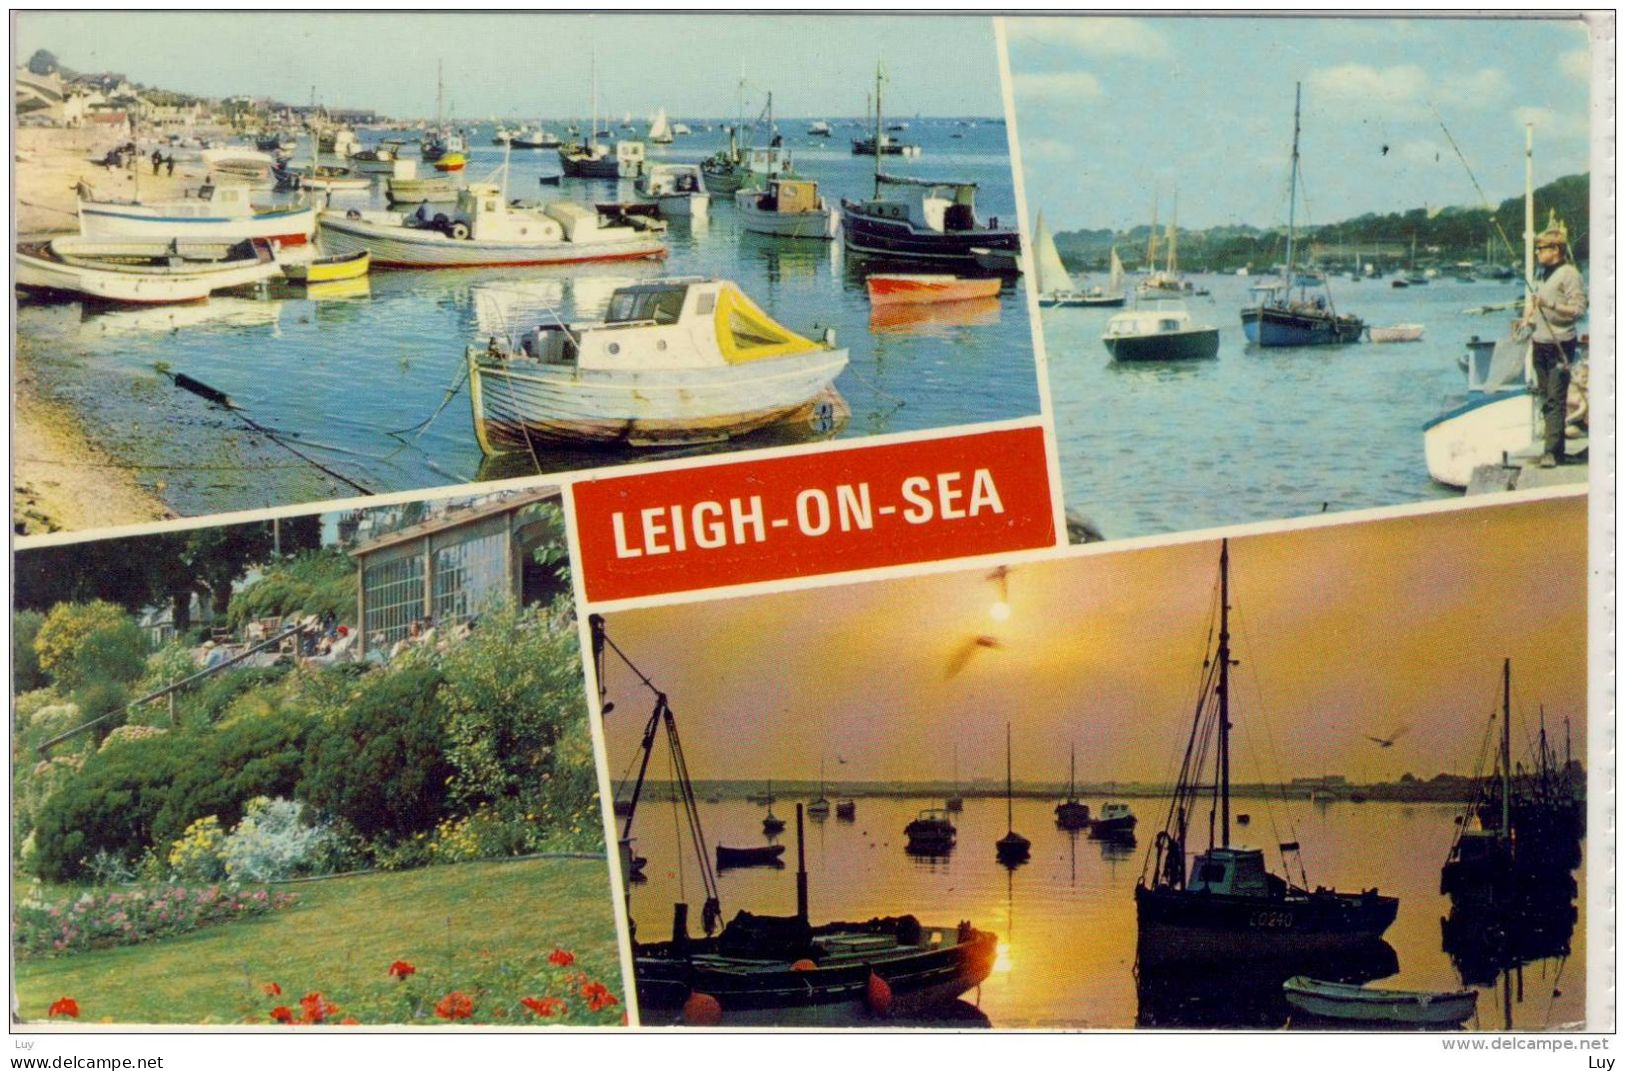 LEIGH-ON-SEA - Multi View, Boating, Sunset, At Anchor, Cliff Gardens - Southend, Westcliff & Leigh